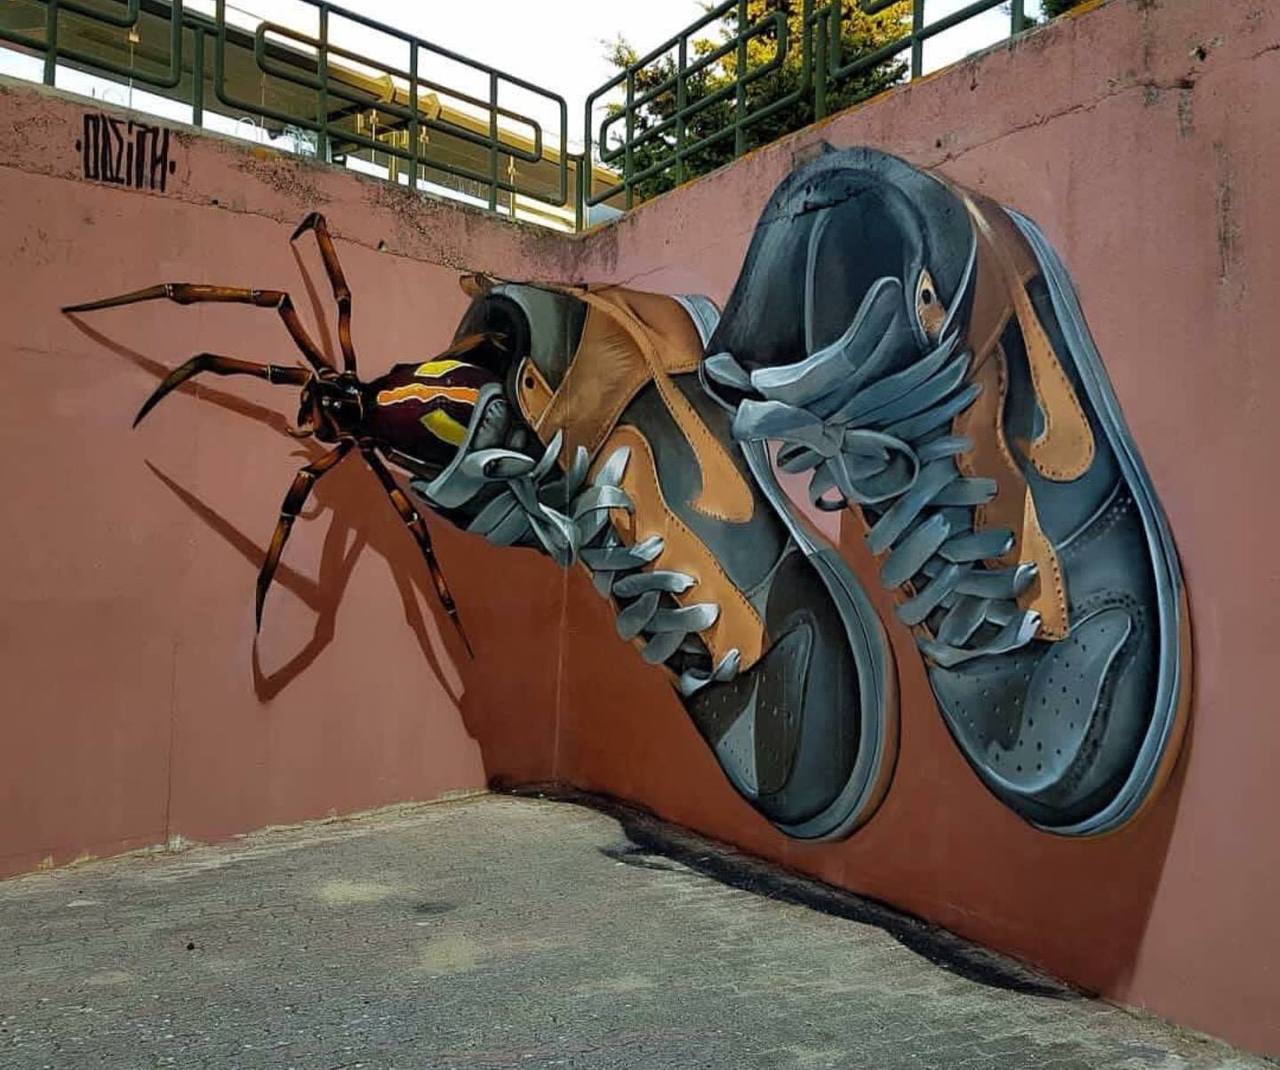 Sneakers, Odeith, graffity art, 2018